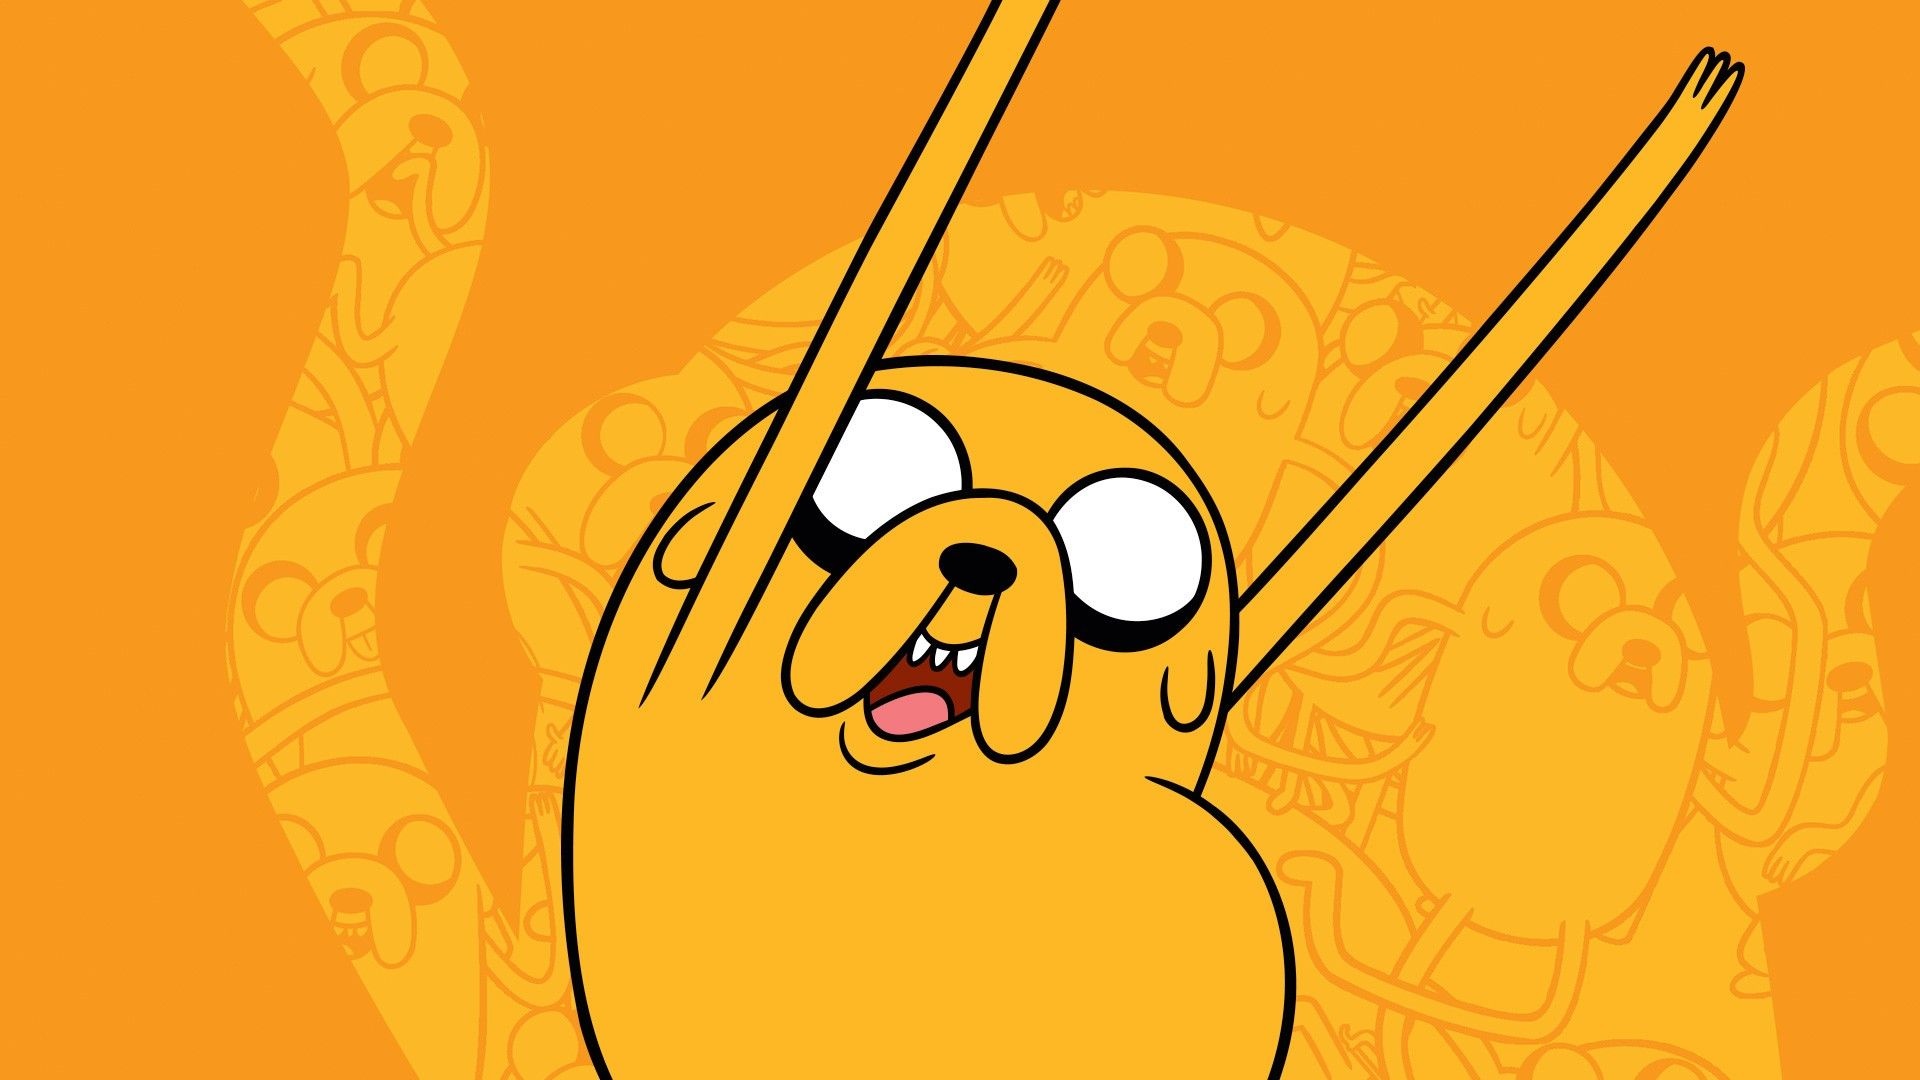 Jake the dog wallpapers, Adventure Time backgrounds, Cartoon characters, Animated series, 1920x1080 Full HD Desktop